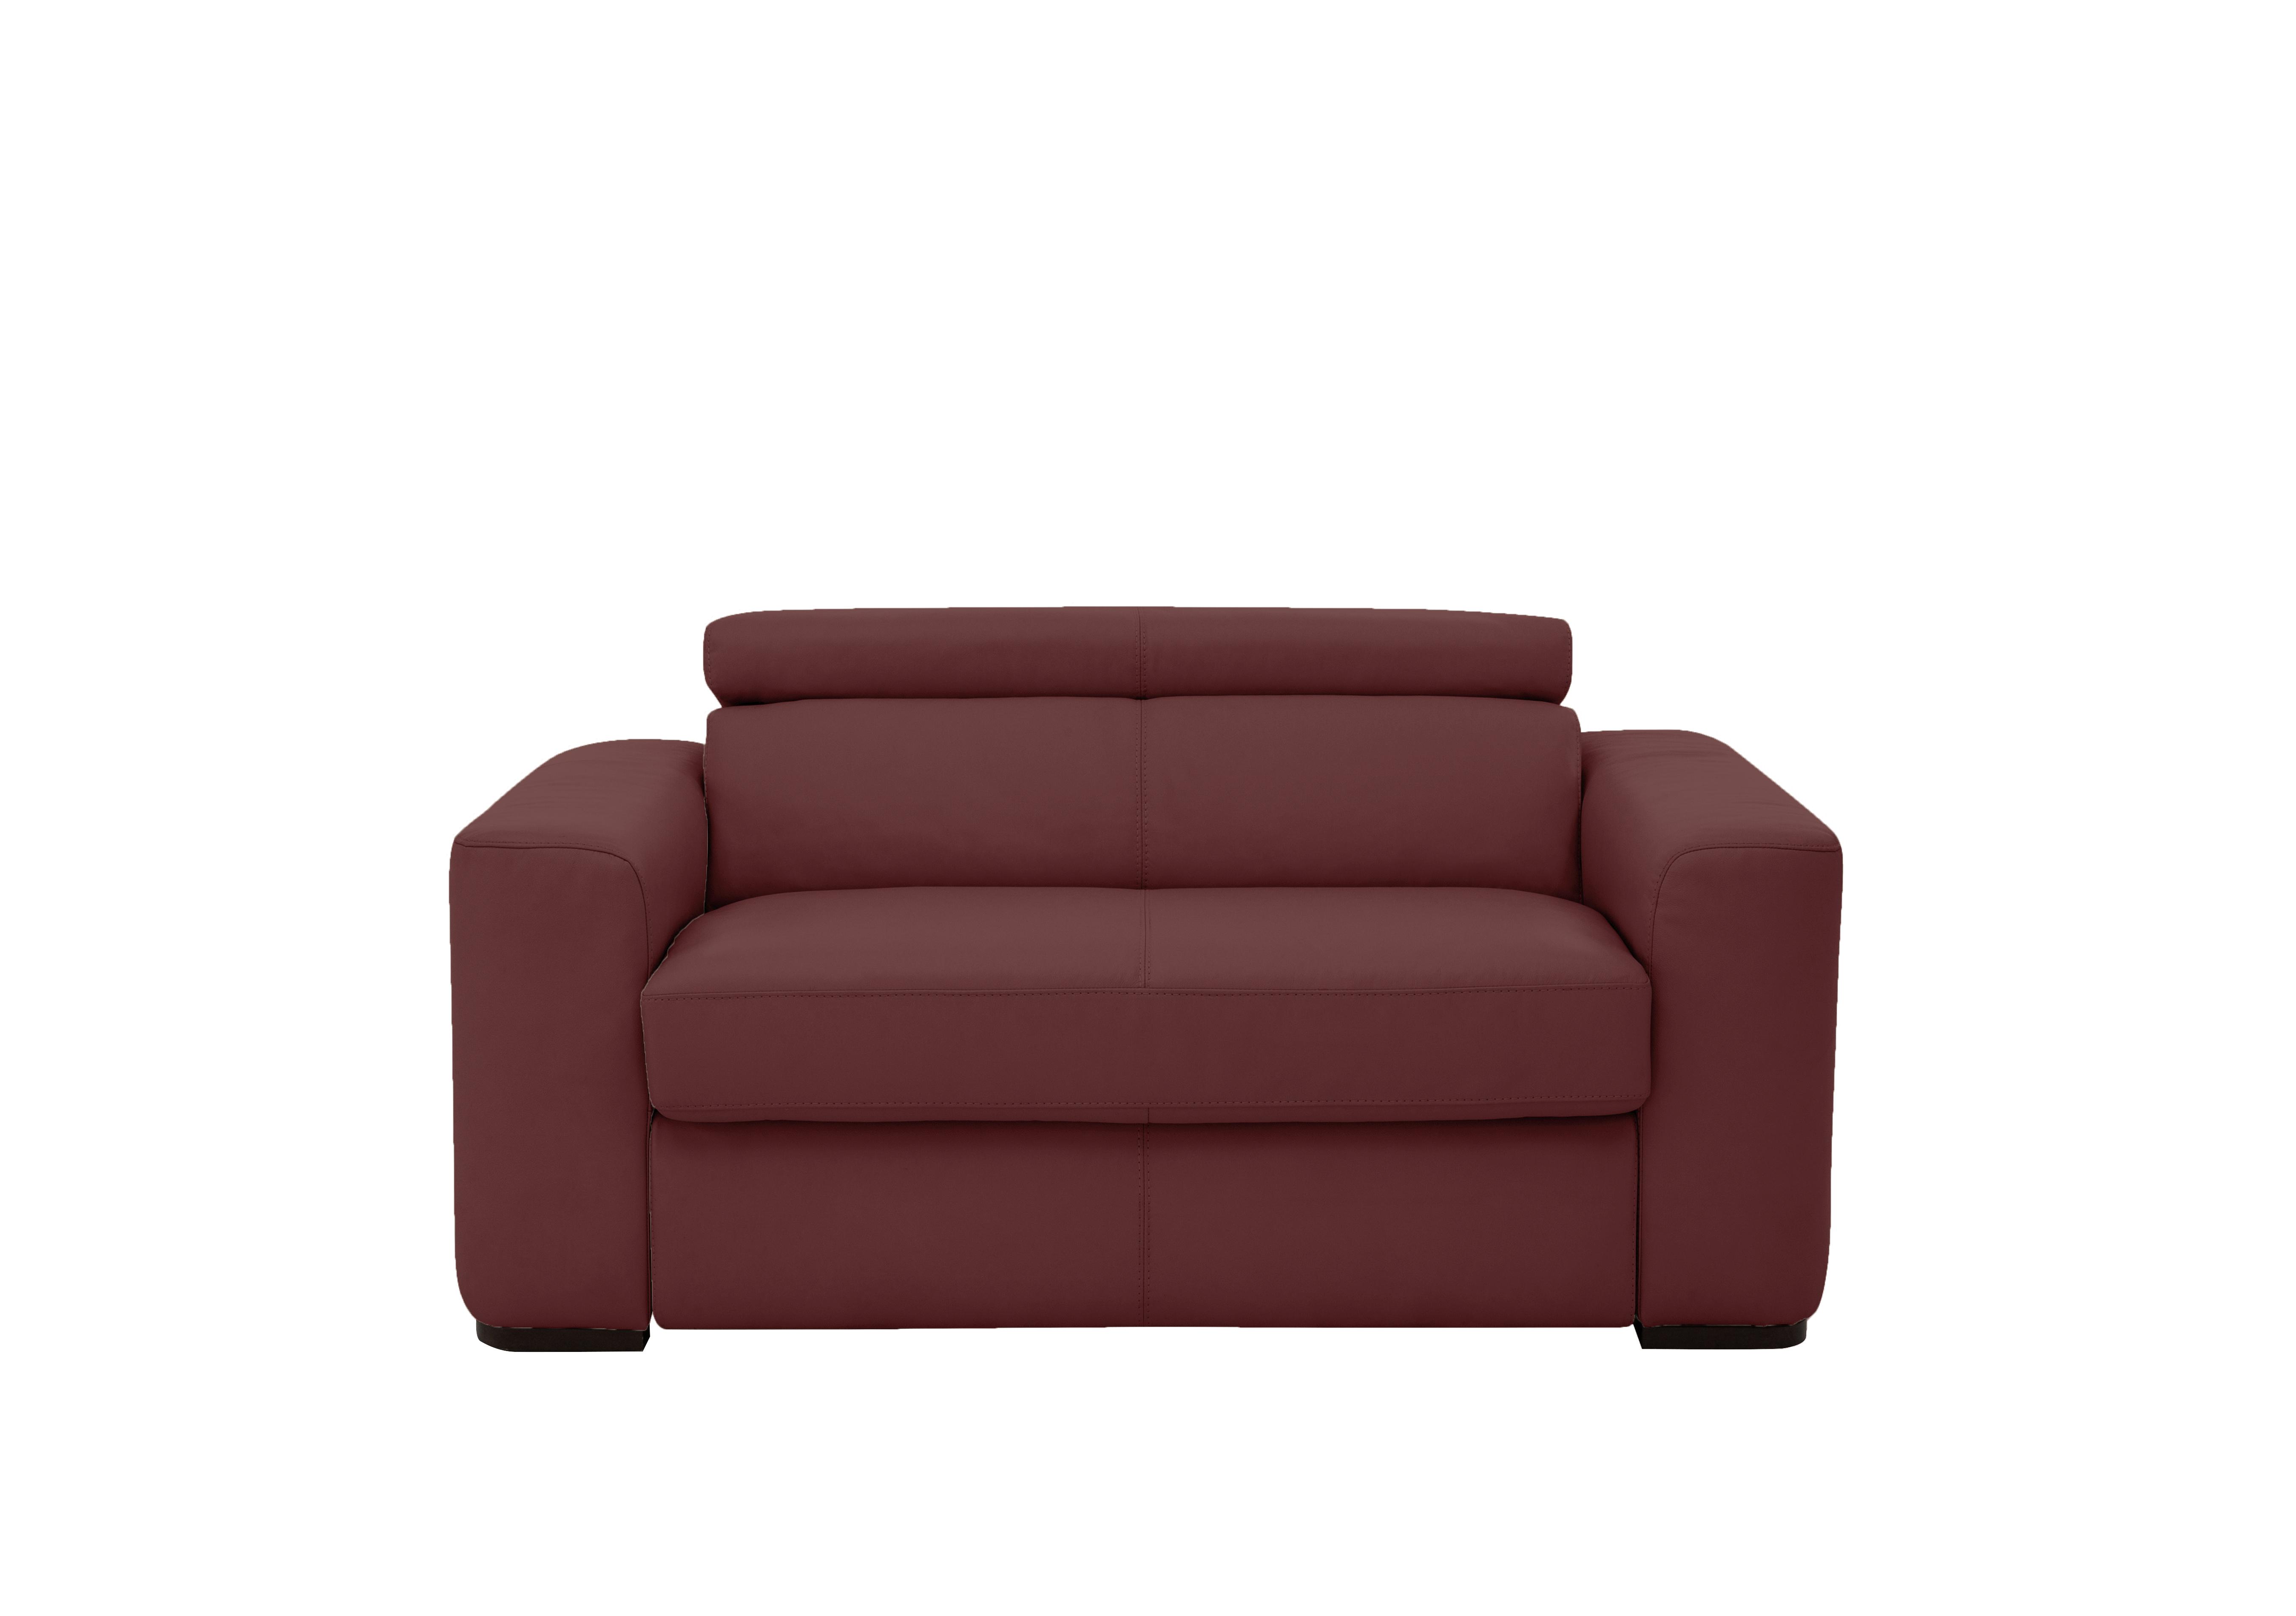 Infinity Large Leather Armchair in Bv-035c Deep Red on Furniture Village